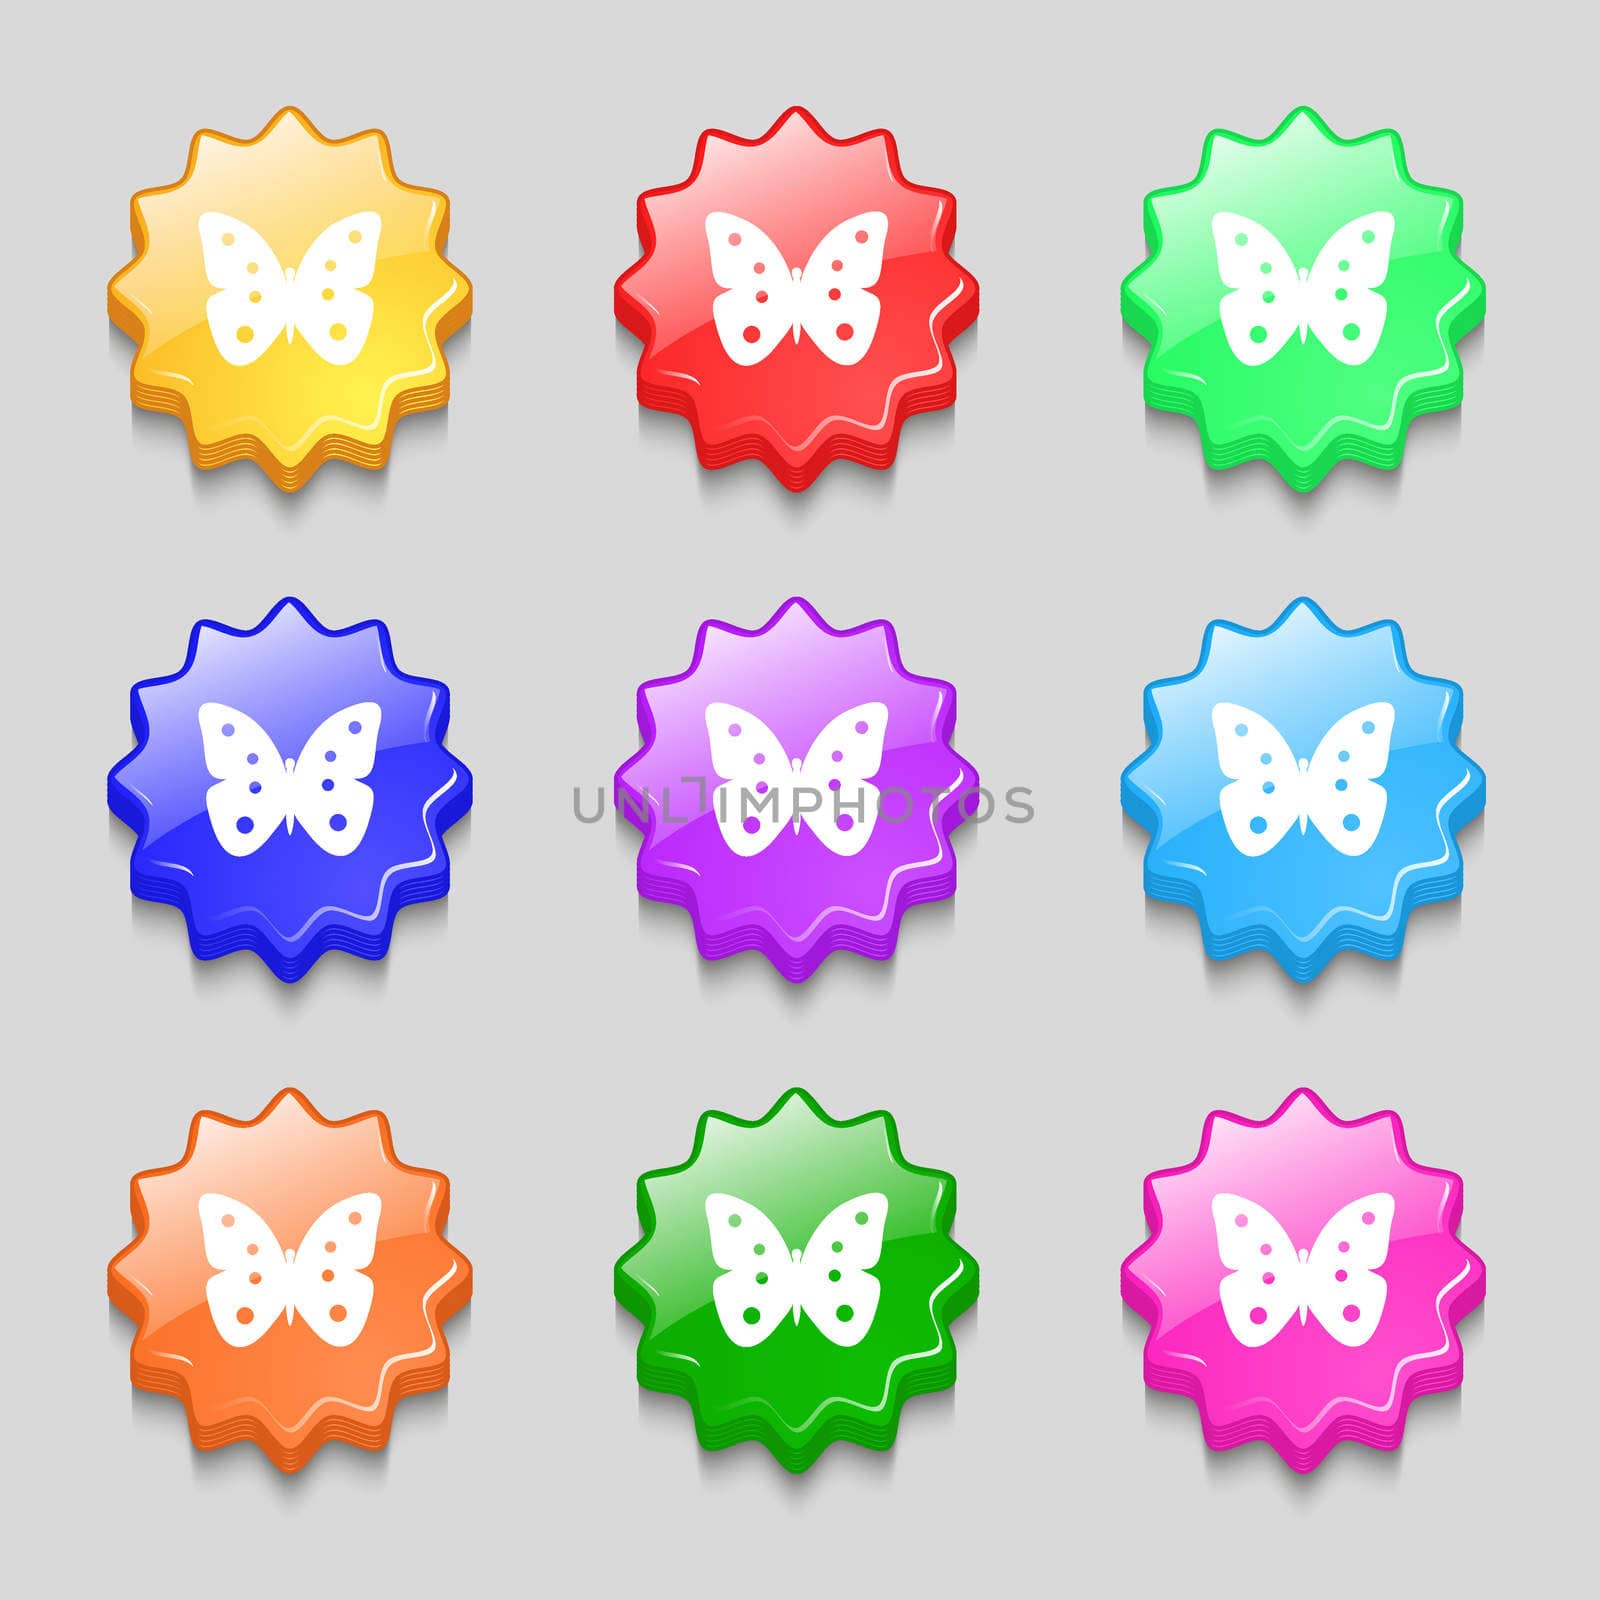 Butterfly sign icon. insect symbol. Symbols on nine wavy colourful buttons. illustration